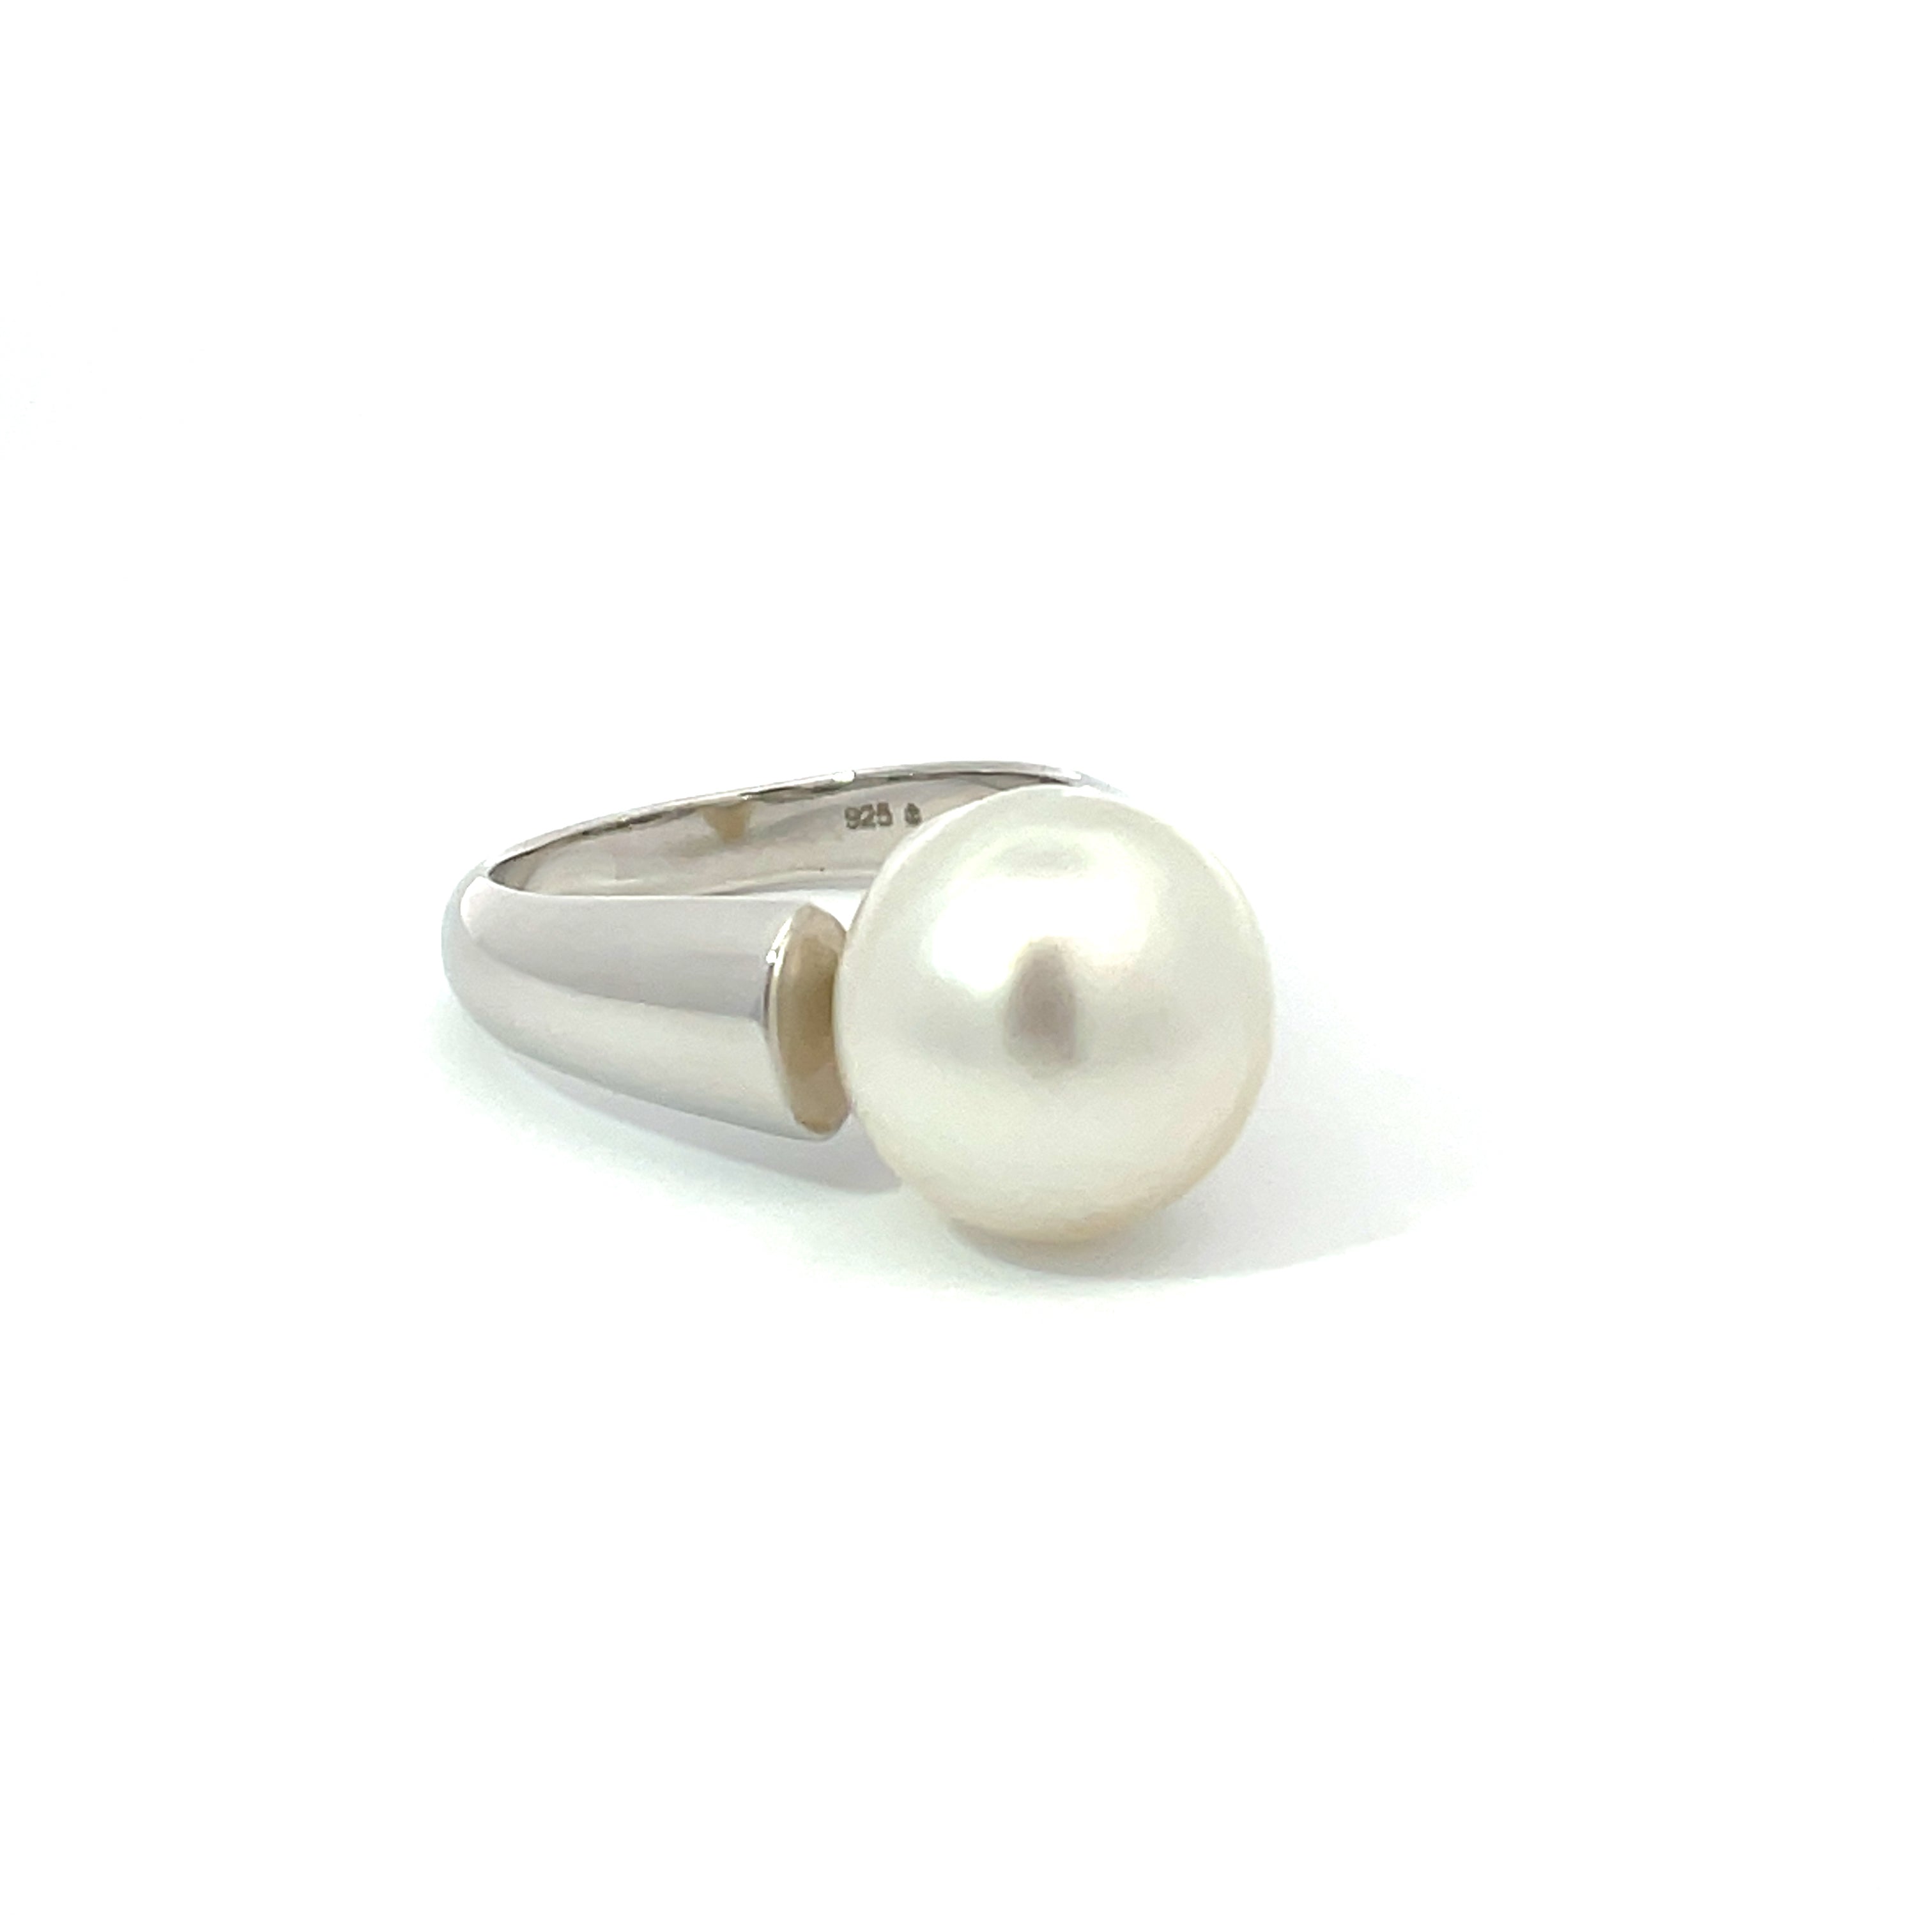 Real Pearl Gemstone, Pearl Ring, 925 Sterling Silver Men Ring|Amazon.com